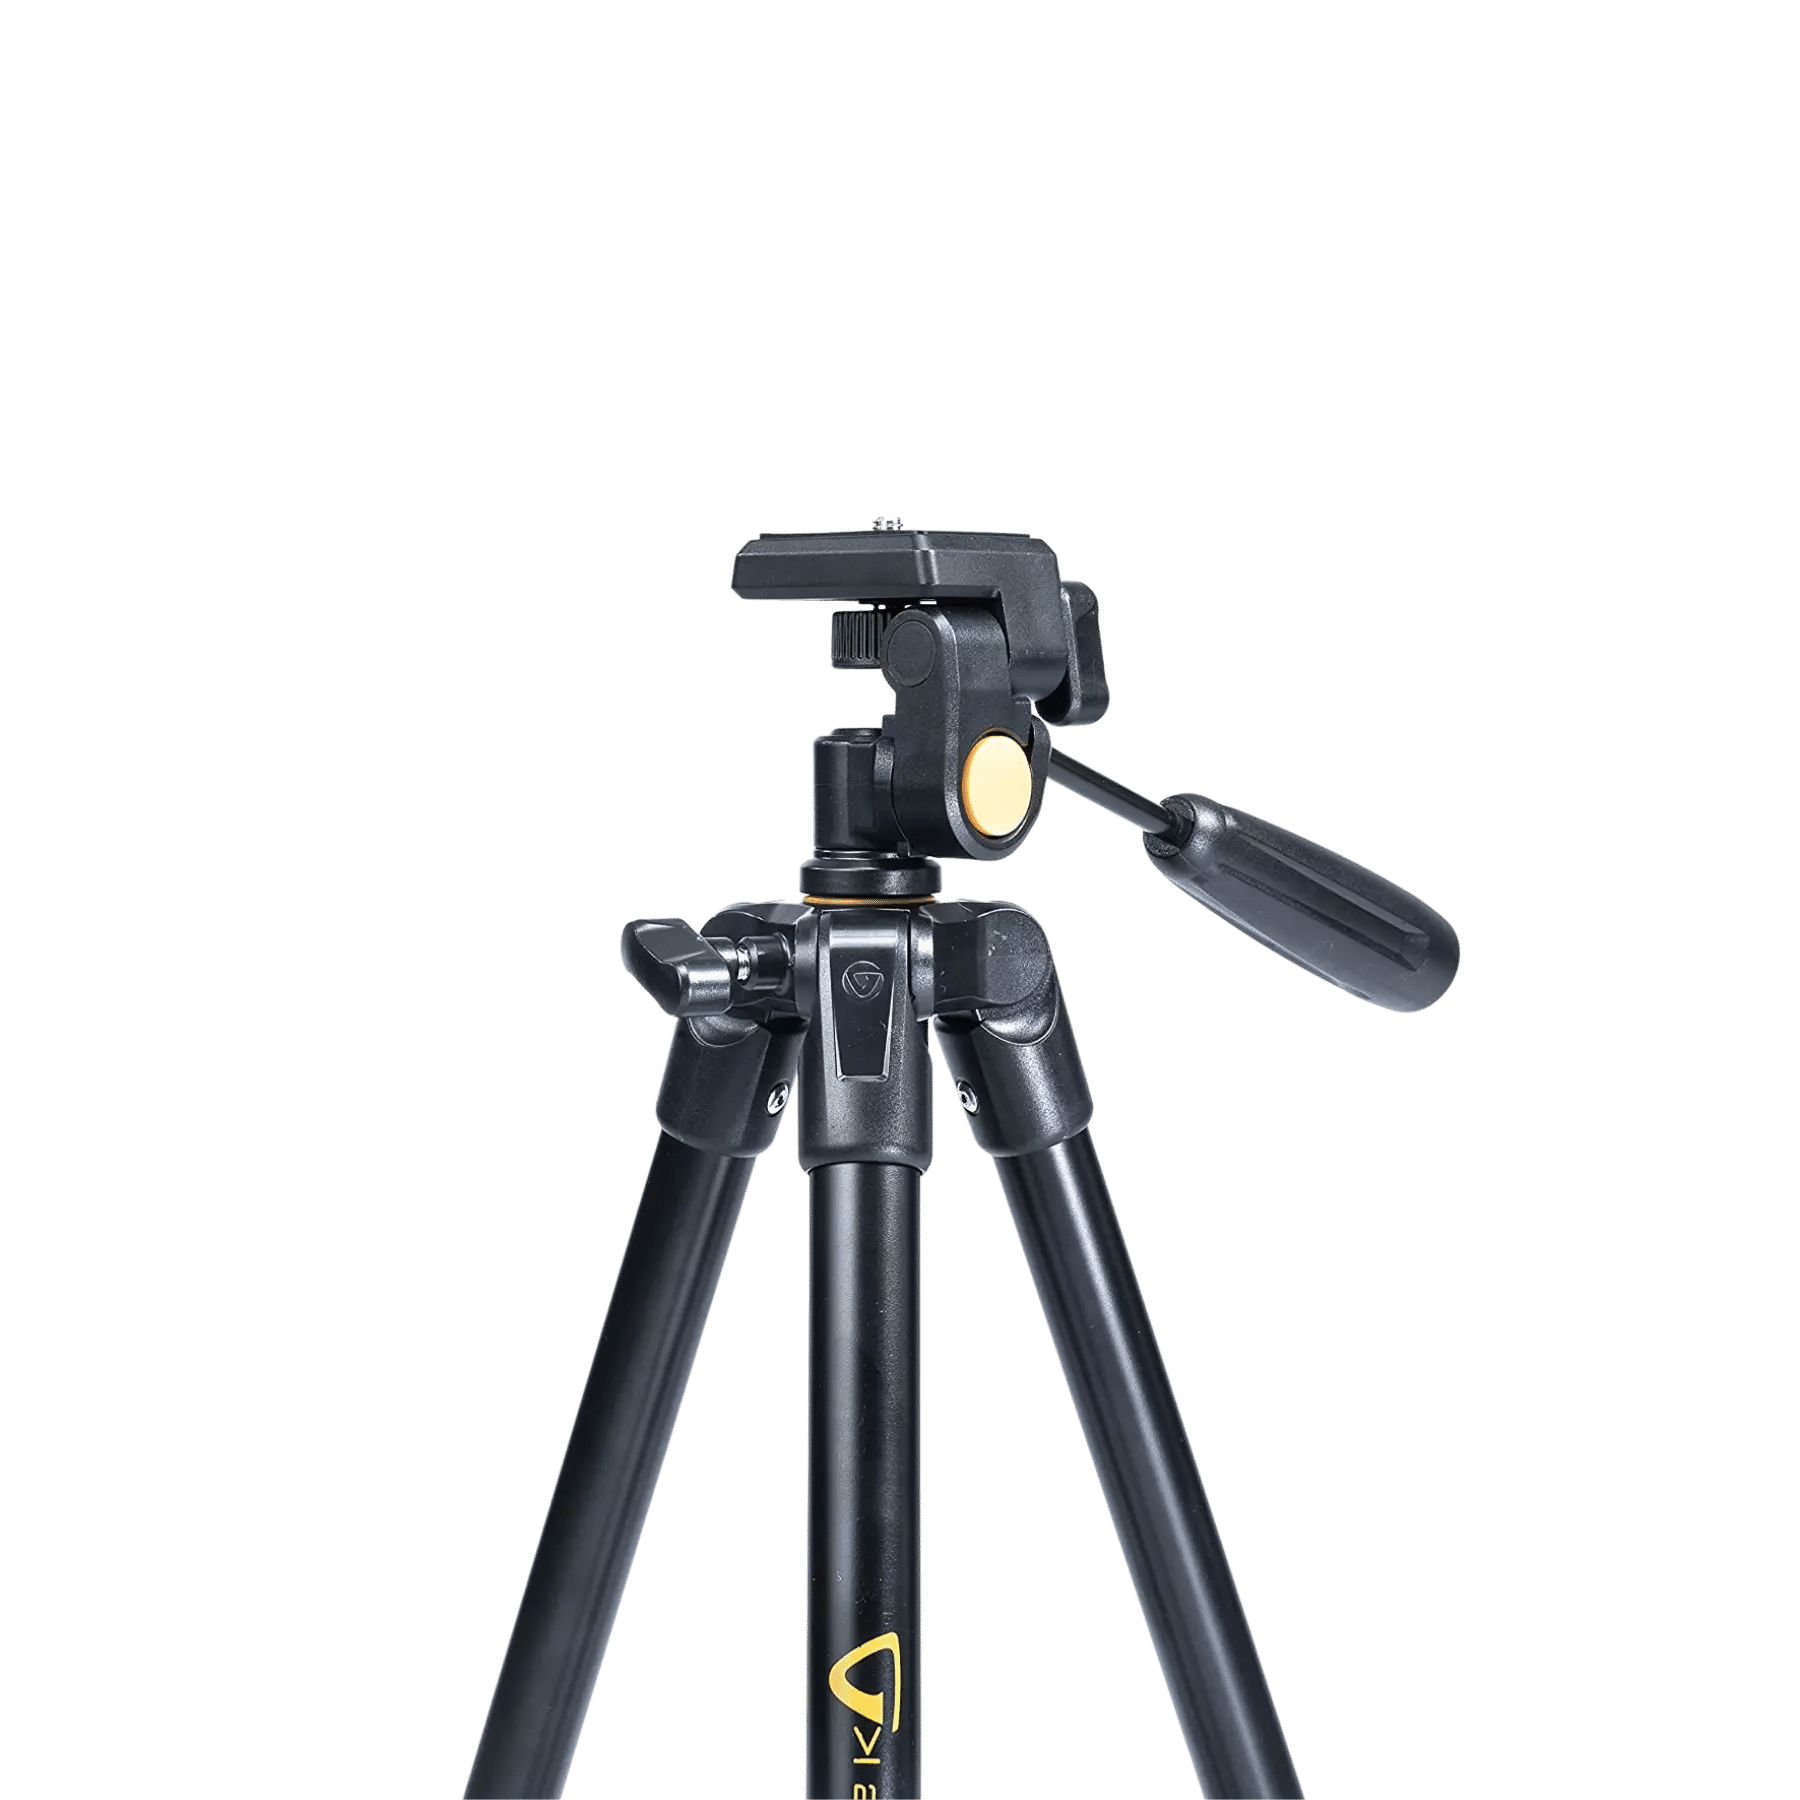 These are product images of Camera Tripod by SharePal in Bangalore.